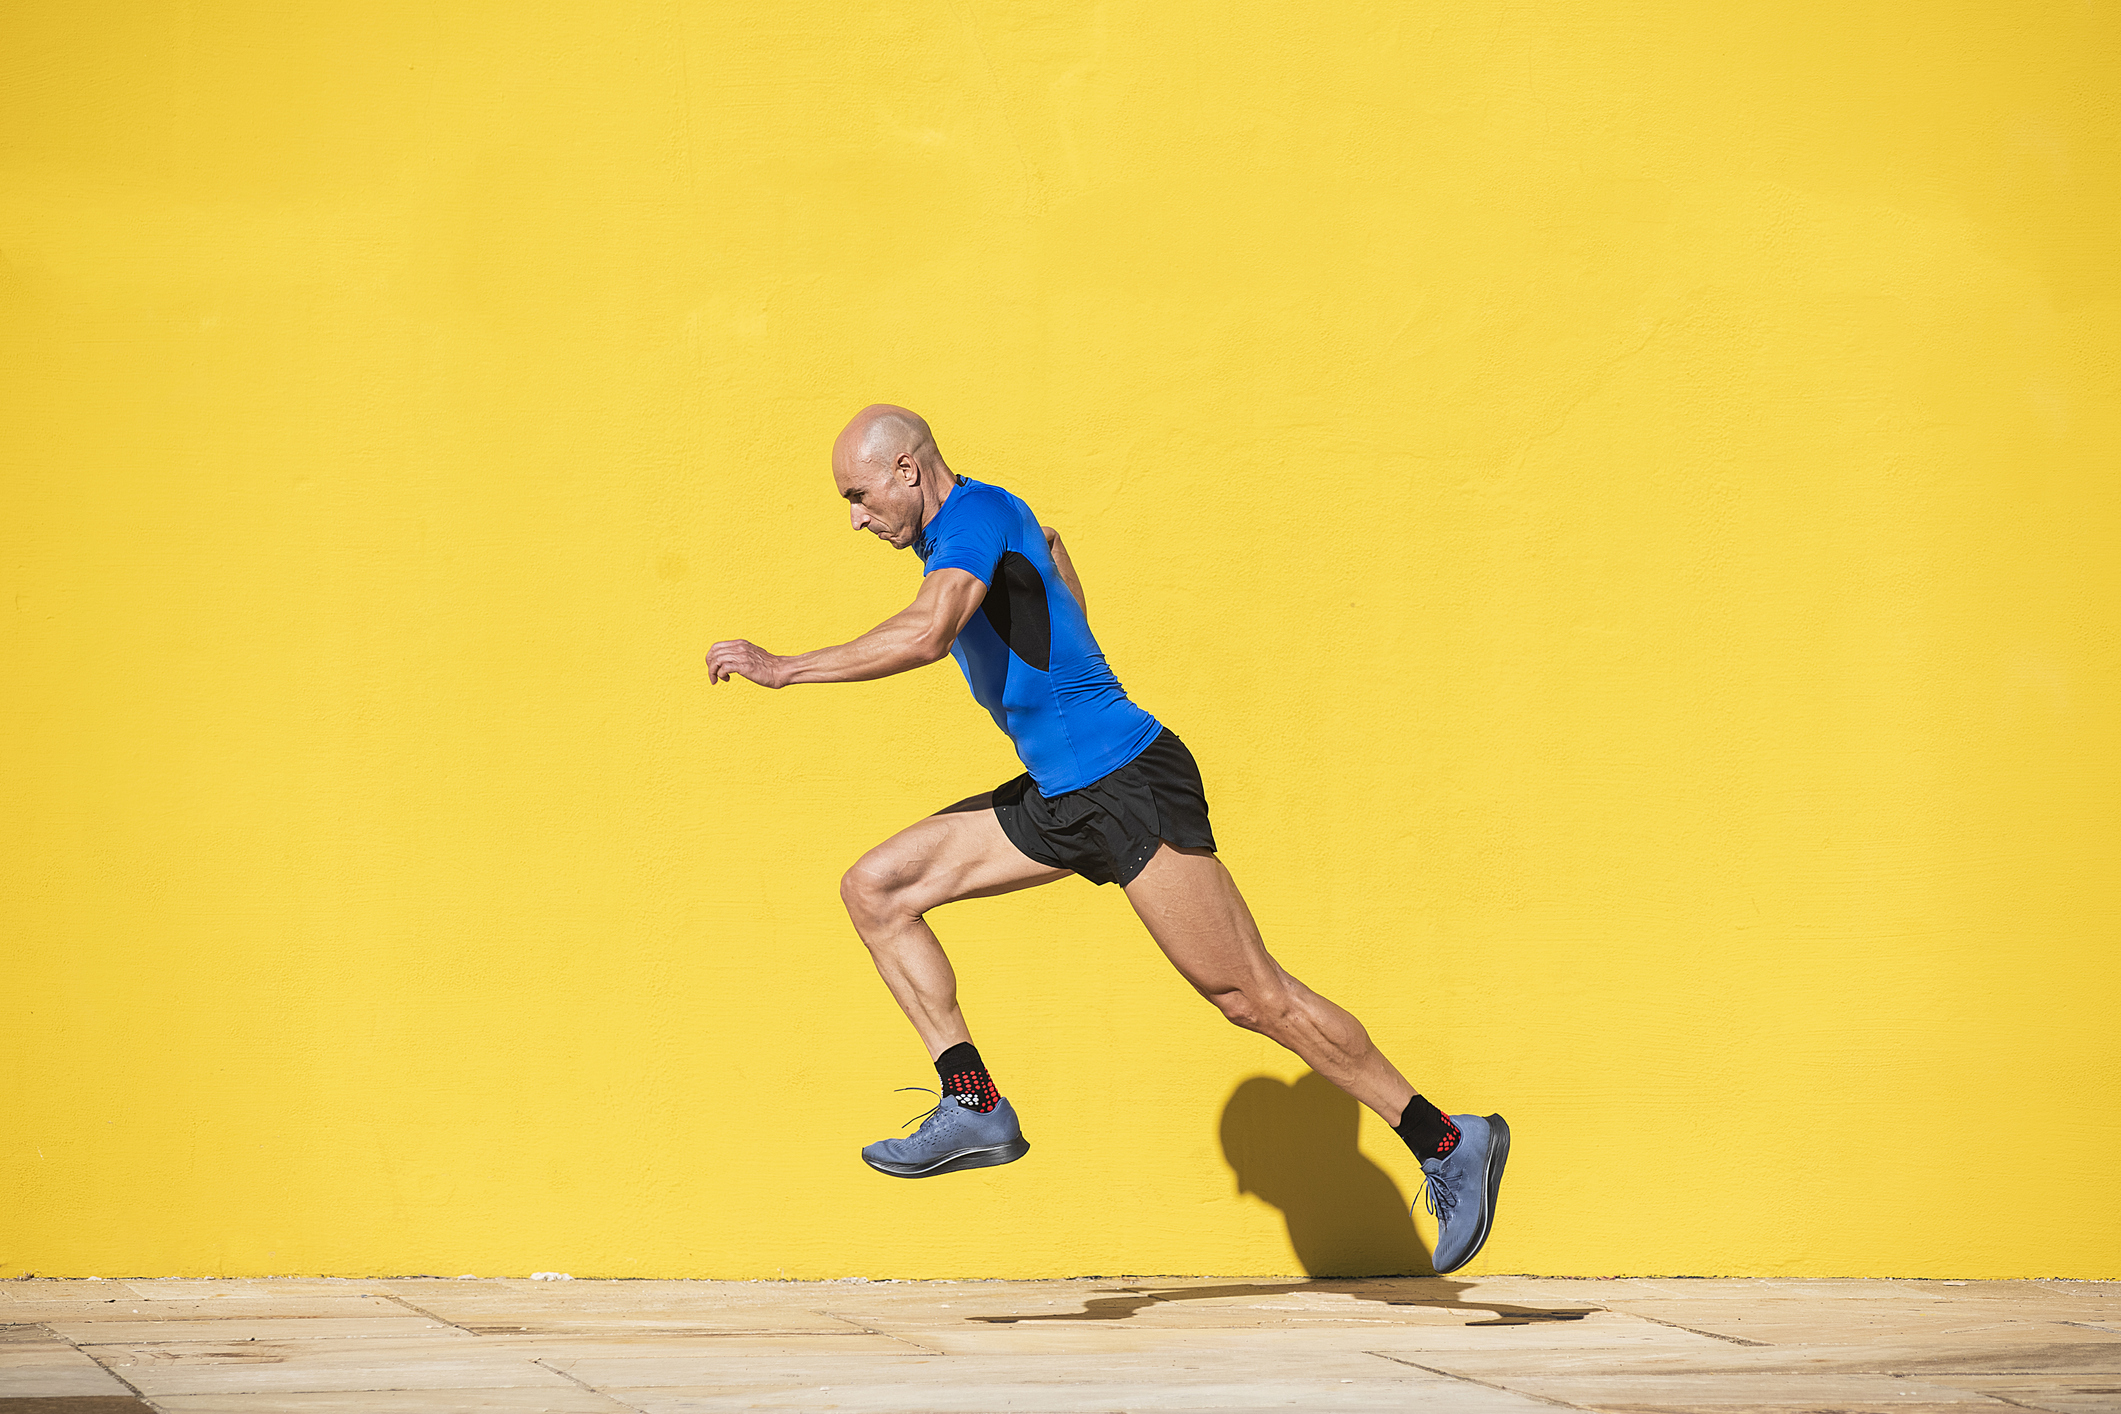 Sportsman with shaved head and sportswear starting a big step to run in the street in front of a yellow wall